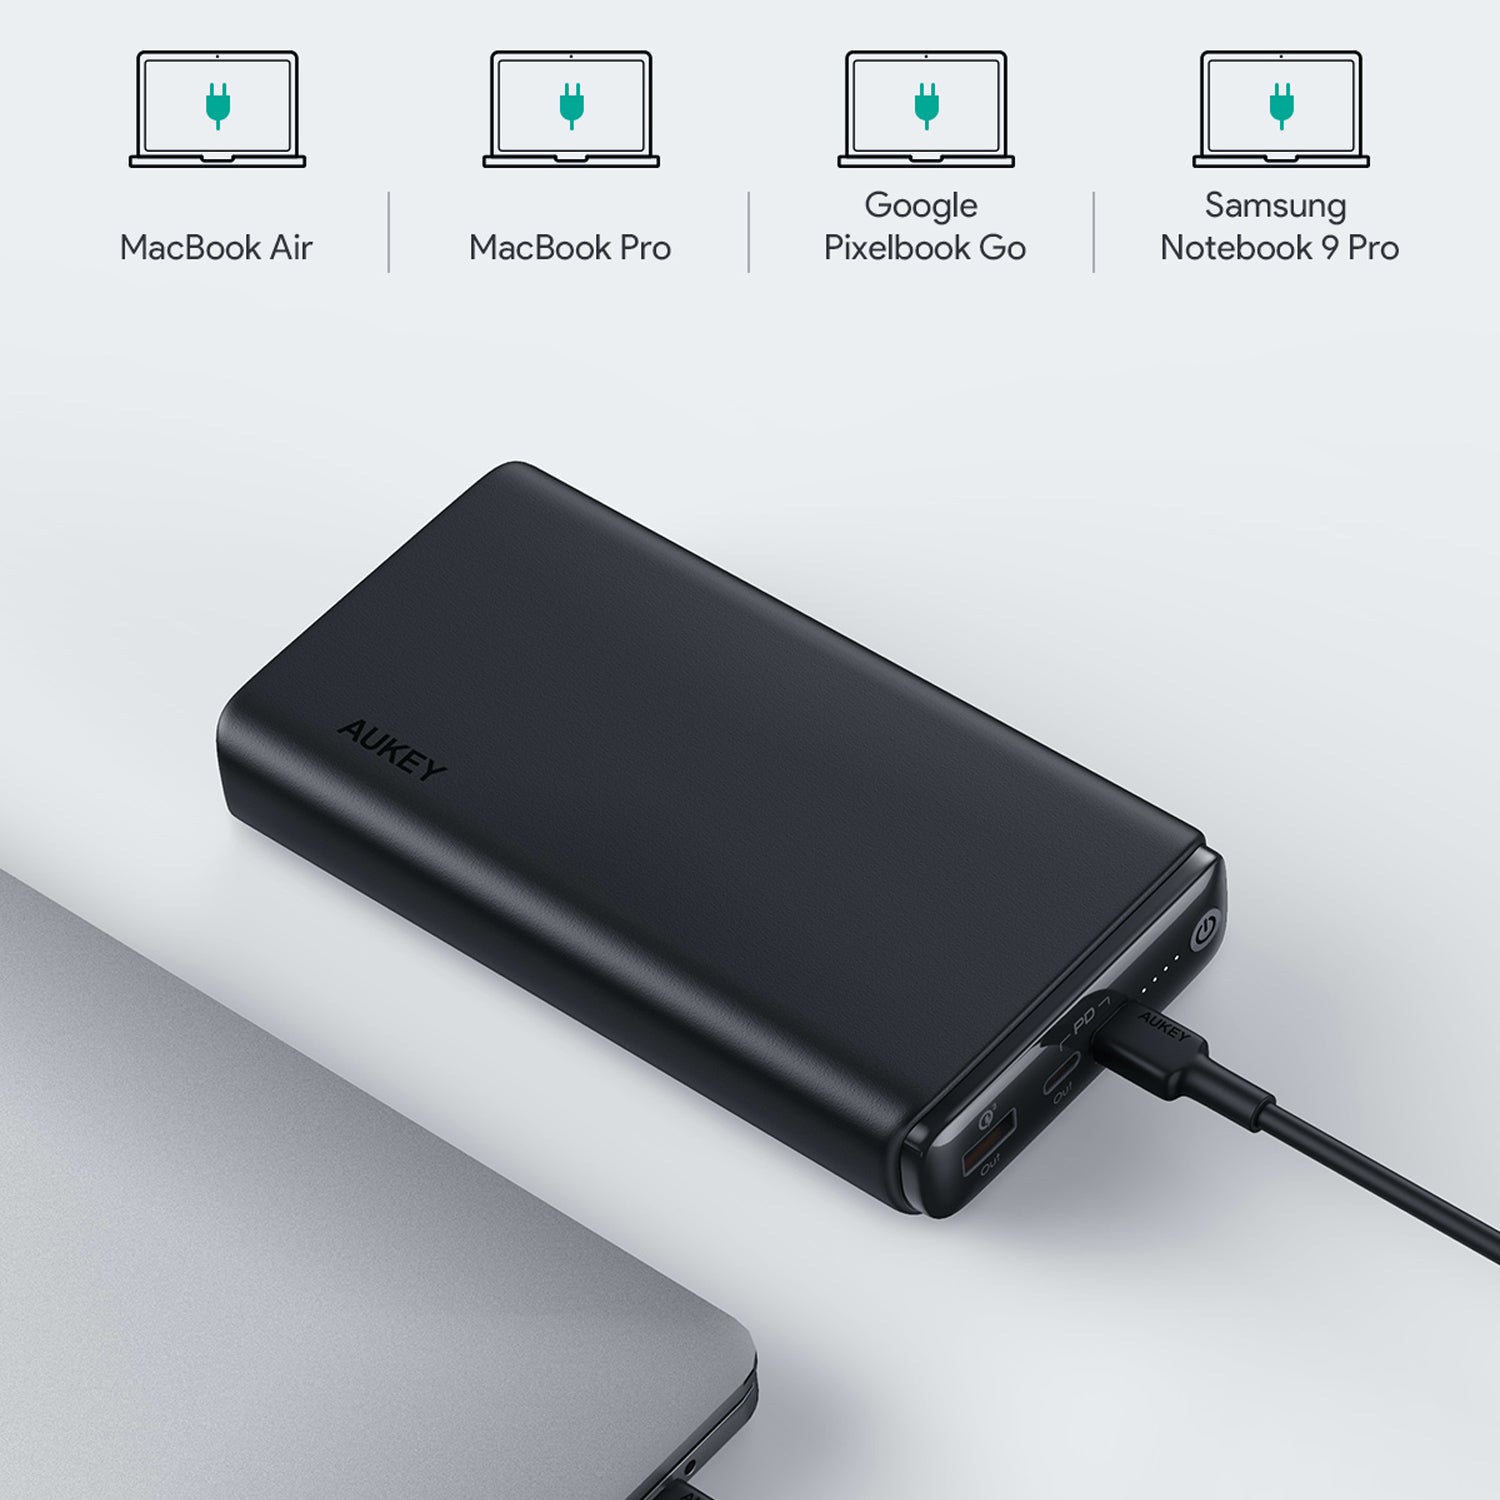 PB-Y24 65W PD 26800mAh Power Bank with Power Delivery & QC 3.0